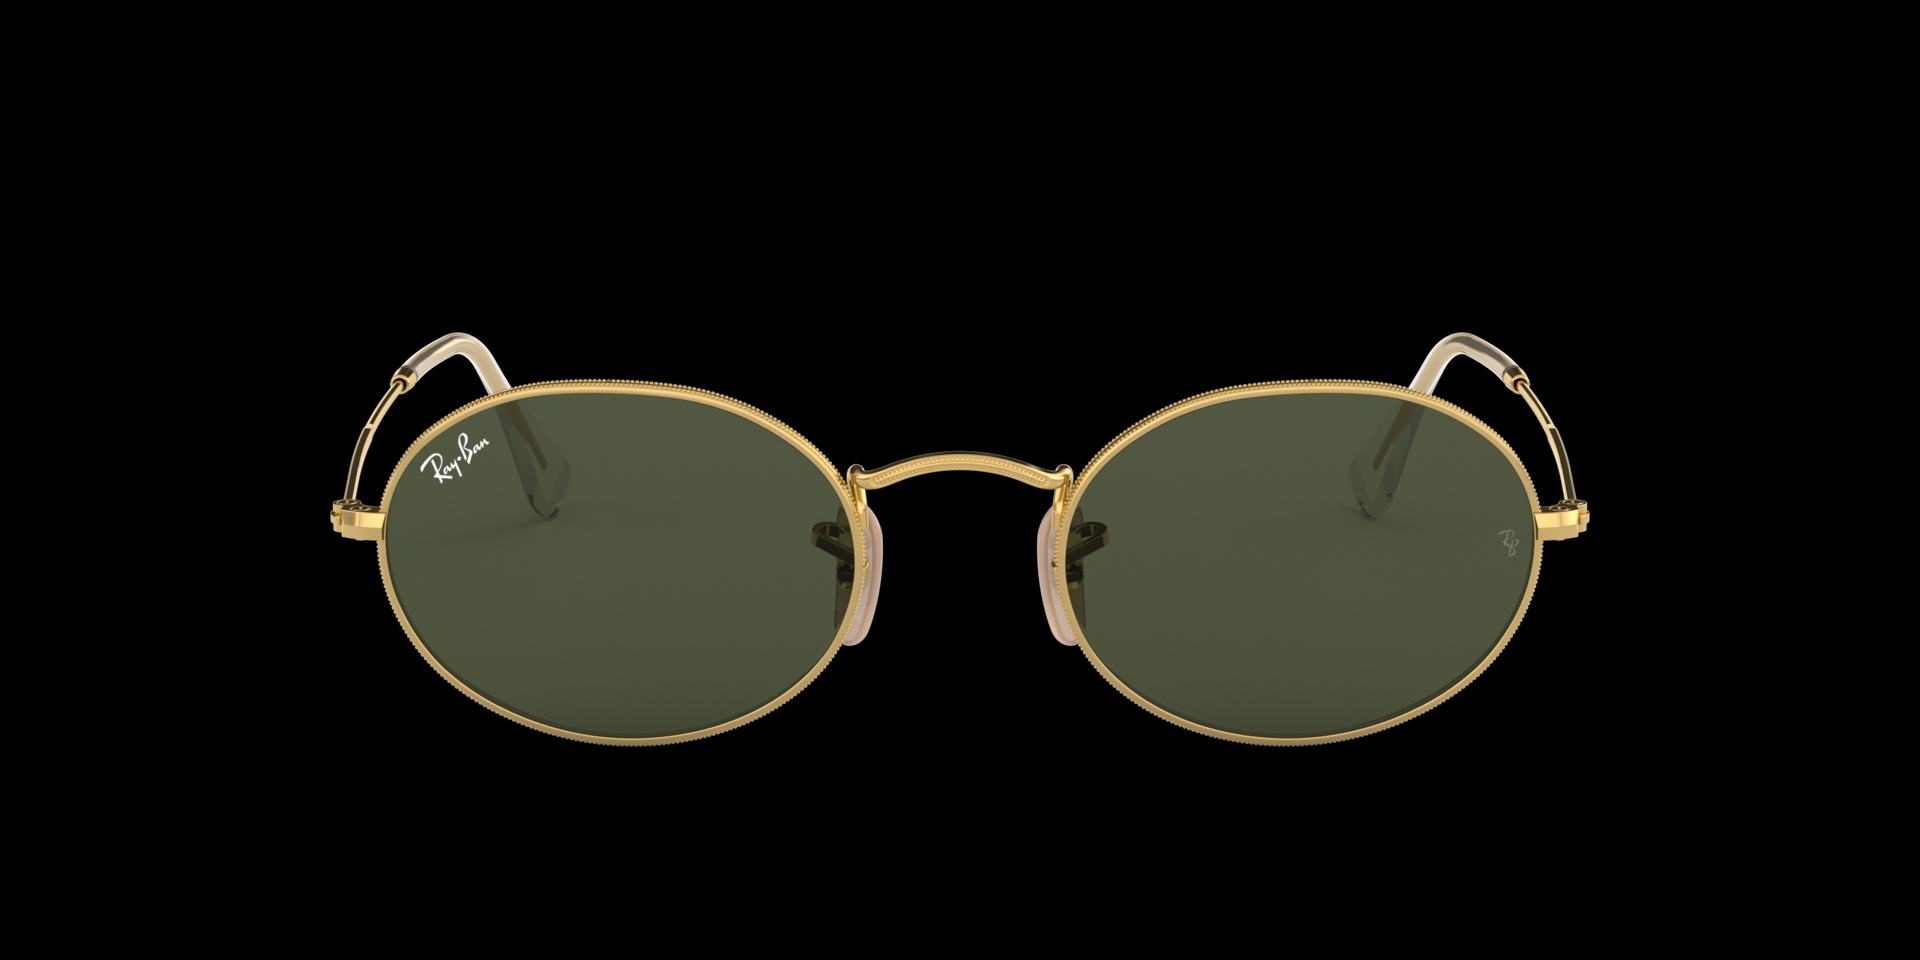 Men's Ray Ban Sunglasses | Next Official Site